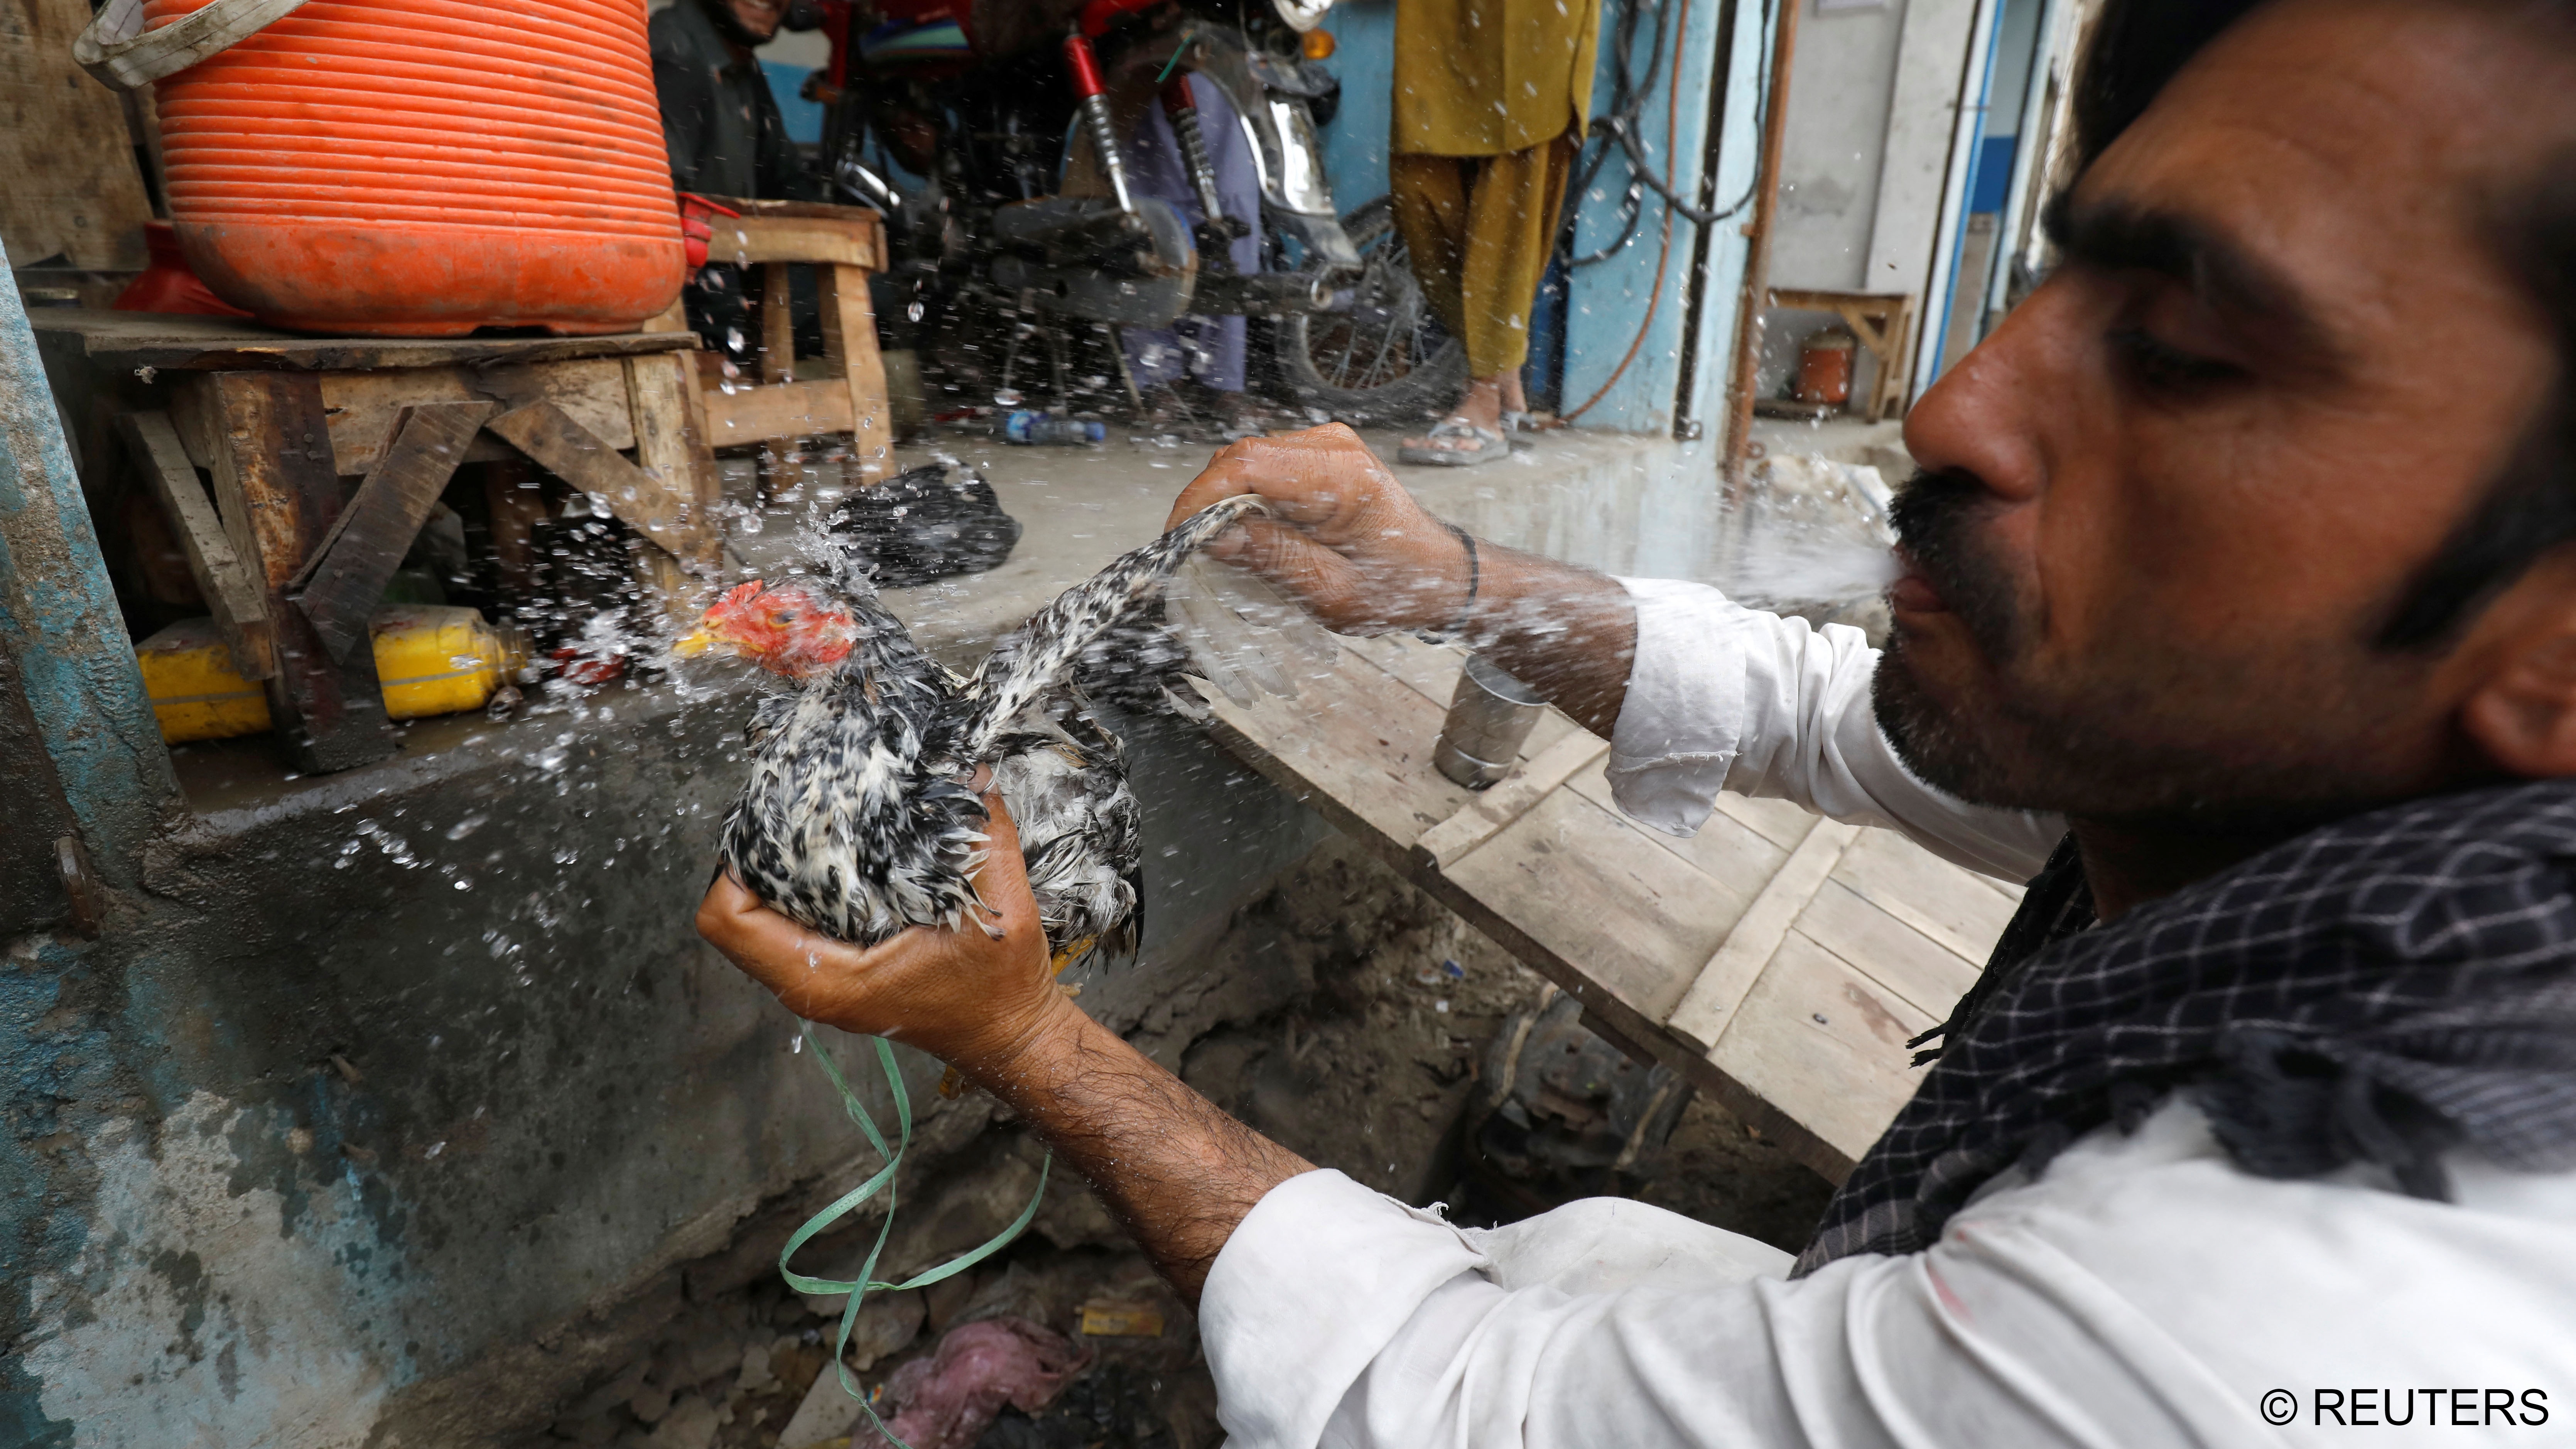 Gulam Mohammad, 37, a vegetable seller, sprays water from his mouth to cool off his chicken (photo: Reuters/Akhtar Soomro)